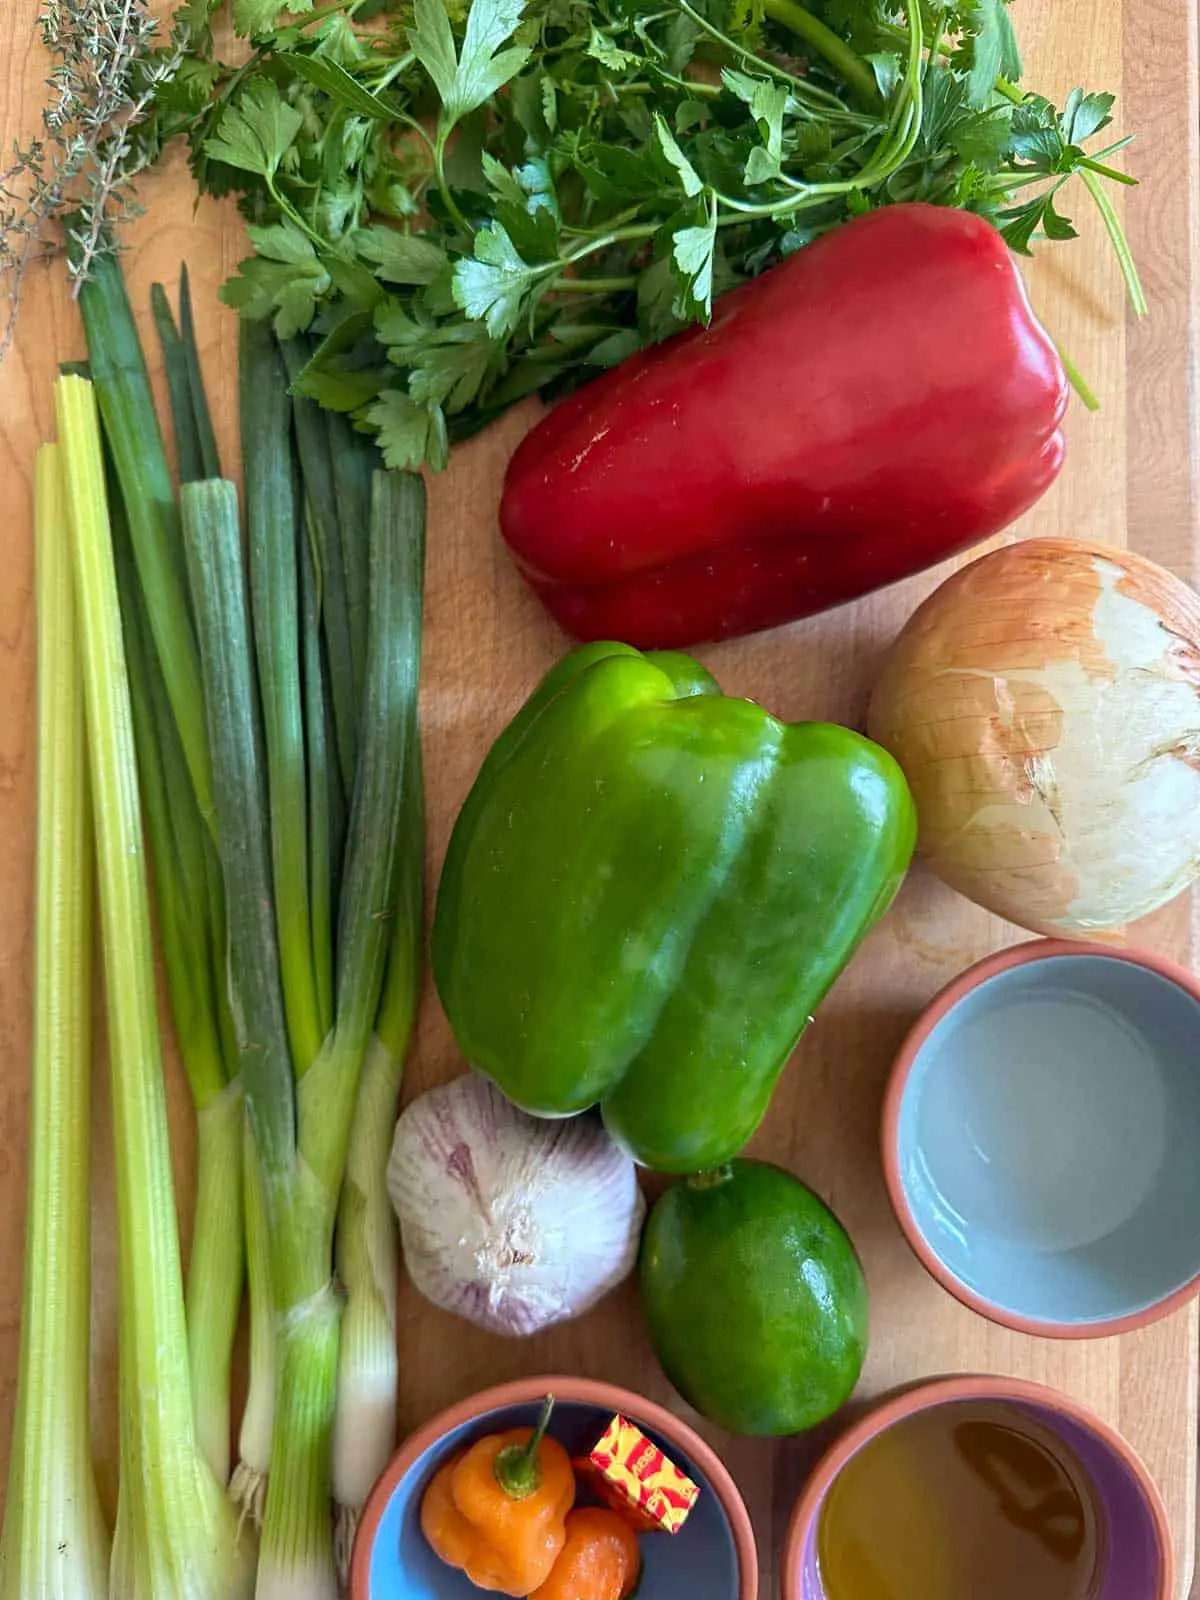 Thyme sprigs, parsley and cilantro, celery stalks, green onions, green and red bell pepper, onion, head of garlic, lime, bowls filled with olive oil and vinegar, and a bowl with Scotch bonnet chilis and a Maggi Bouillon cube.